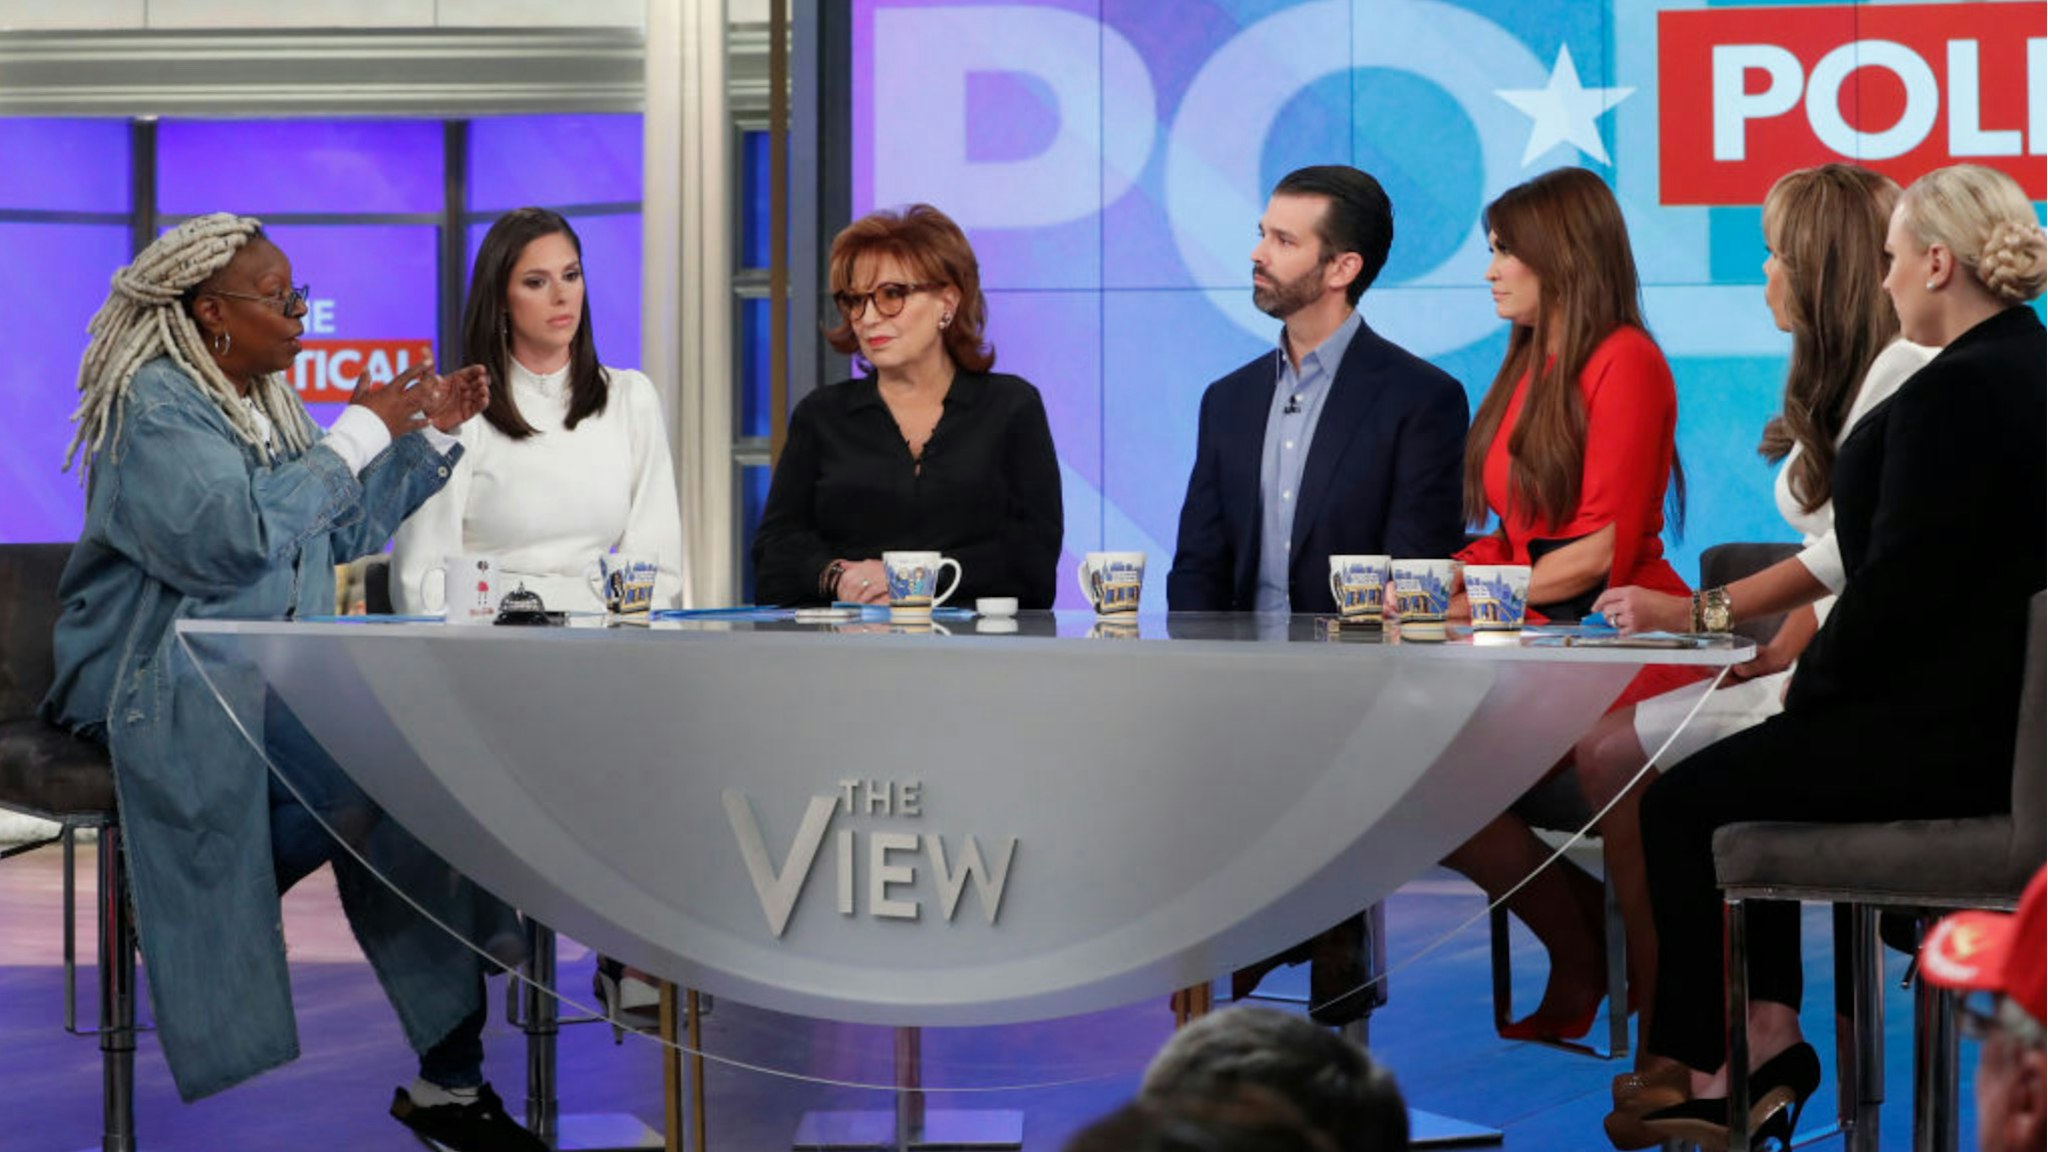 Donald Trump Jr. and Kimberly Guilfoyle appeared today, Thursday, November 7, 2019 on ABC's "The View," as the show celebrated its 5,000th episode.